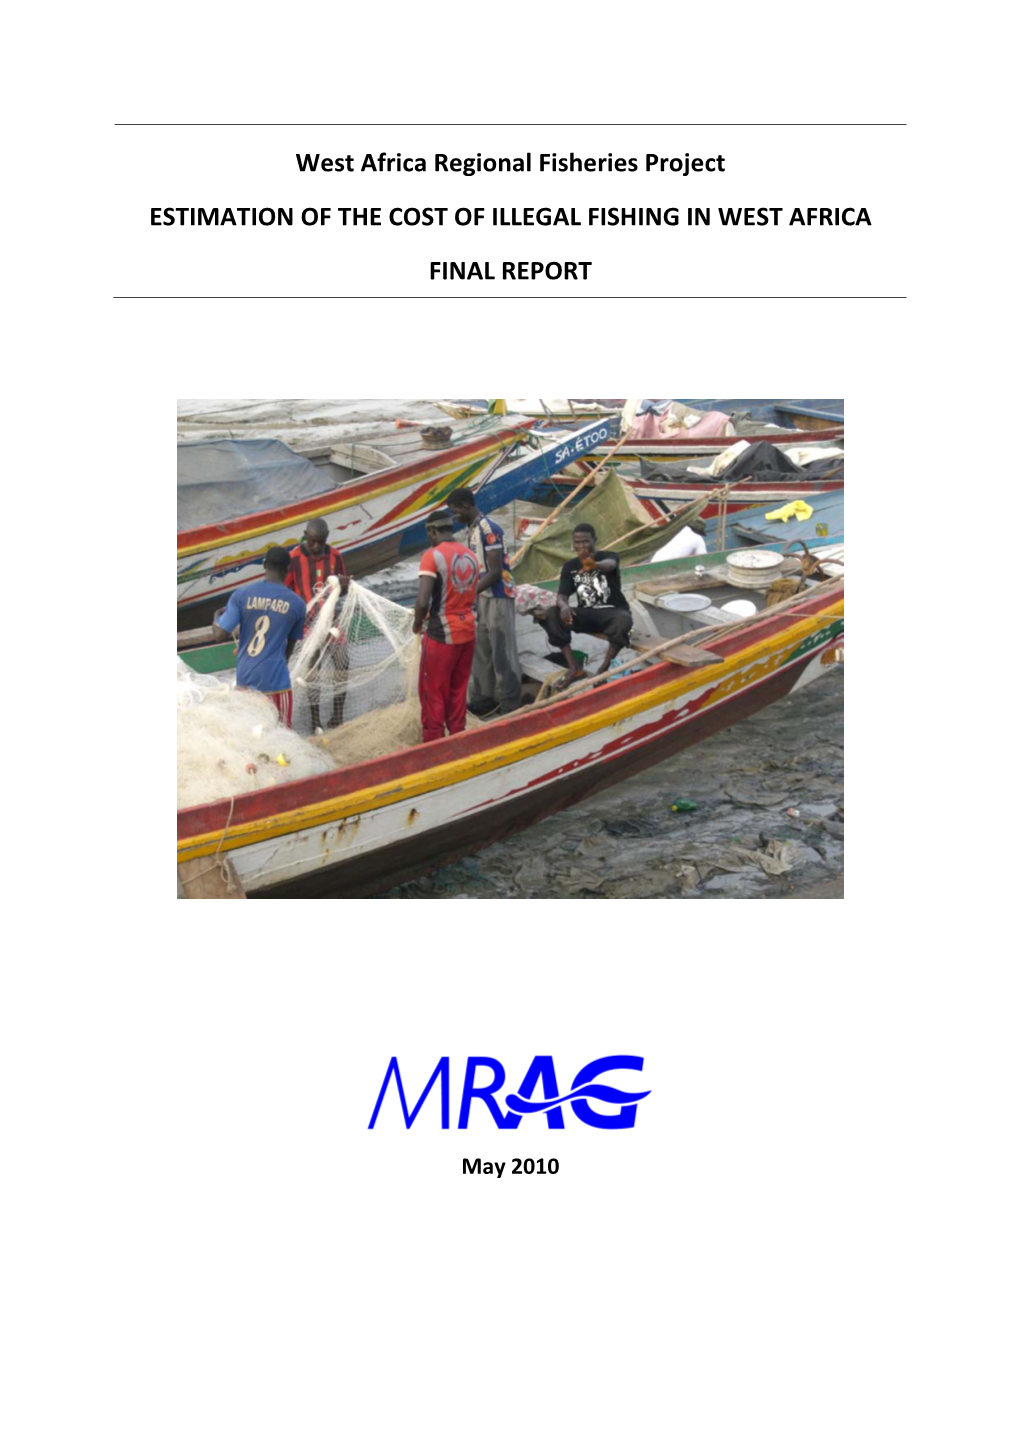 West Africa Regional Fisheries Project: Estimation of the Cost of Illegal